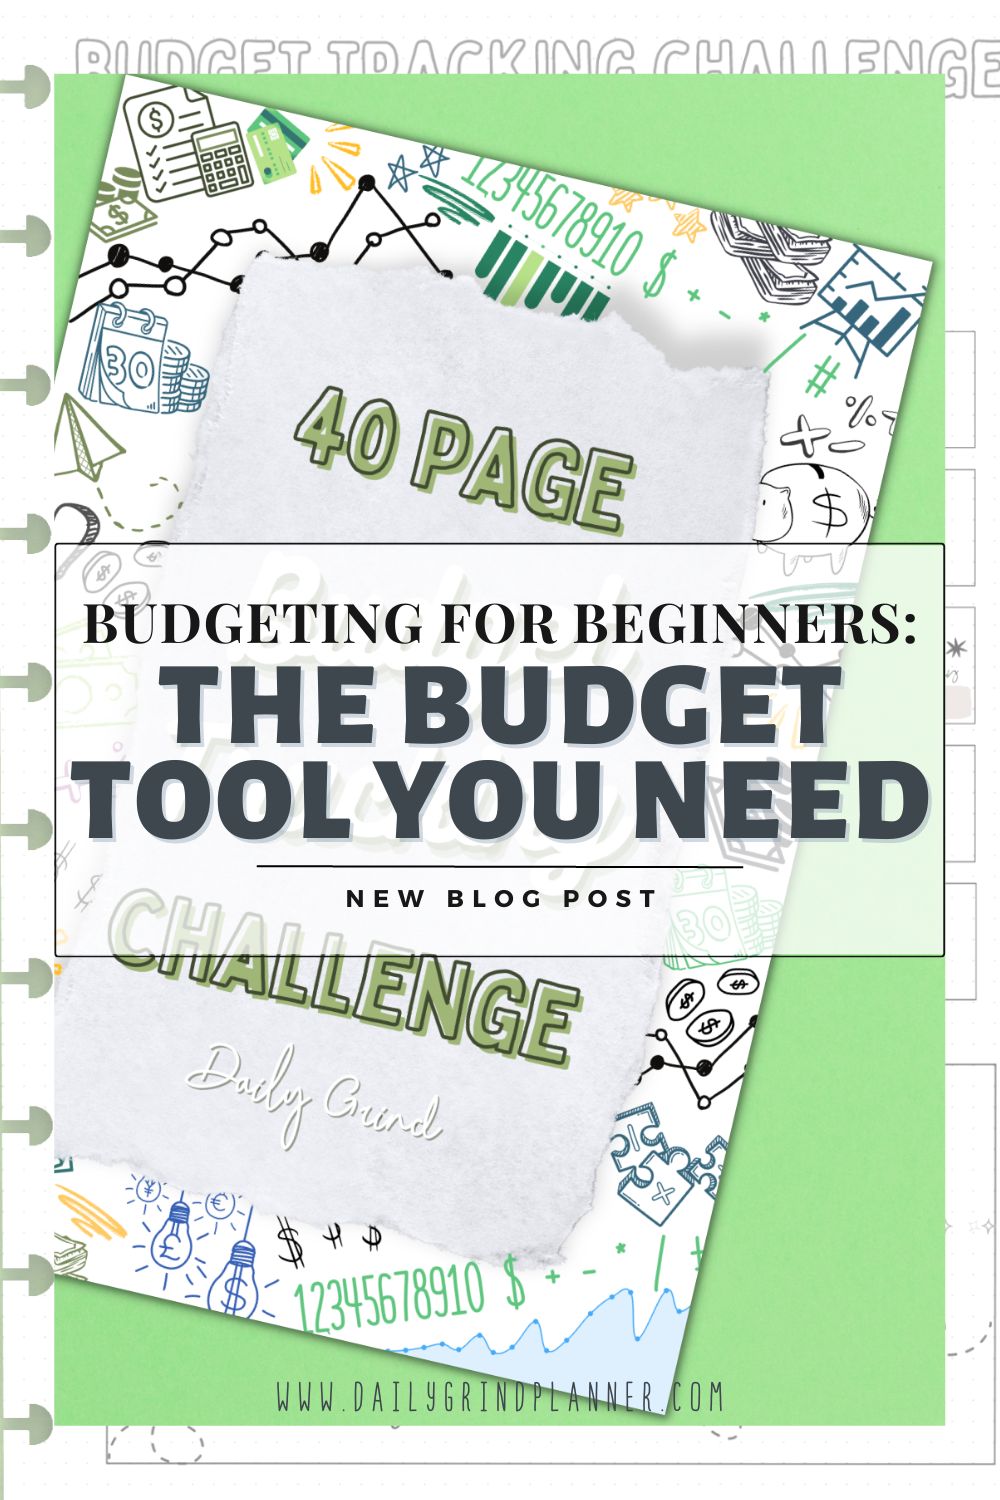 Budgeting for Beginners: The Budget Tool You Need